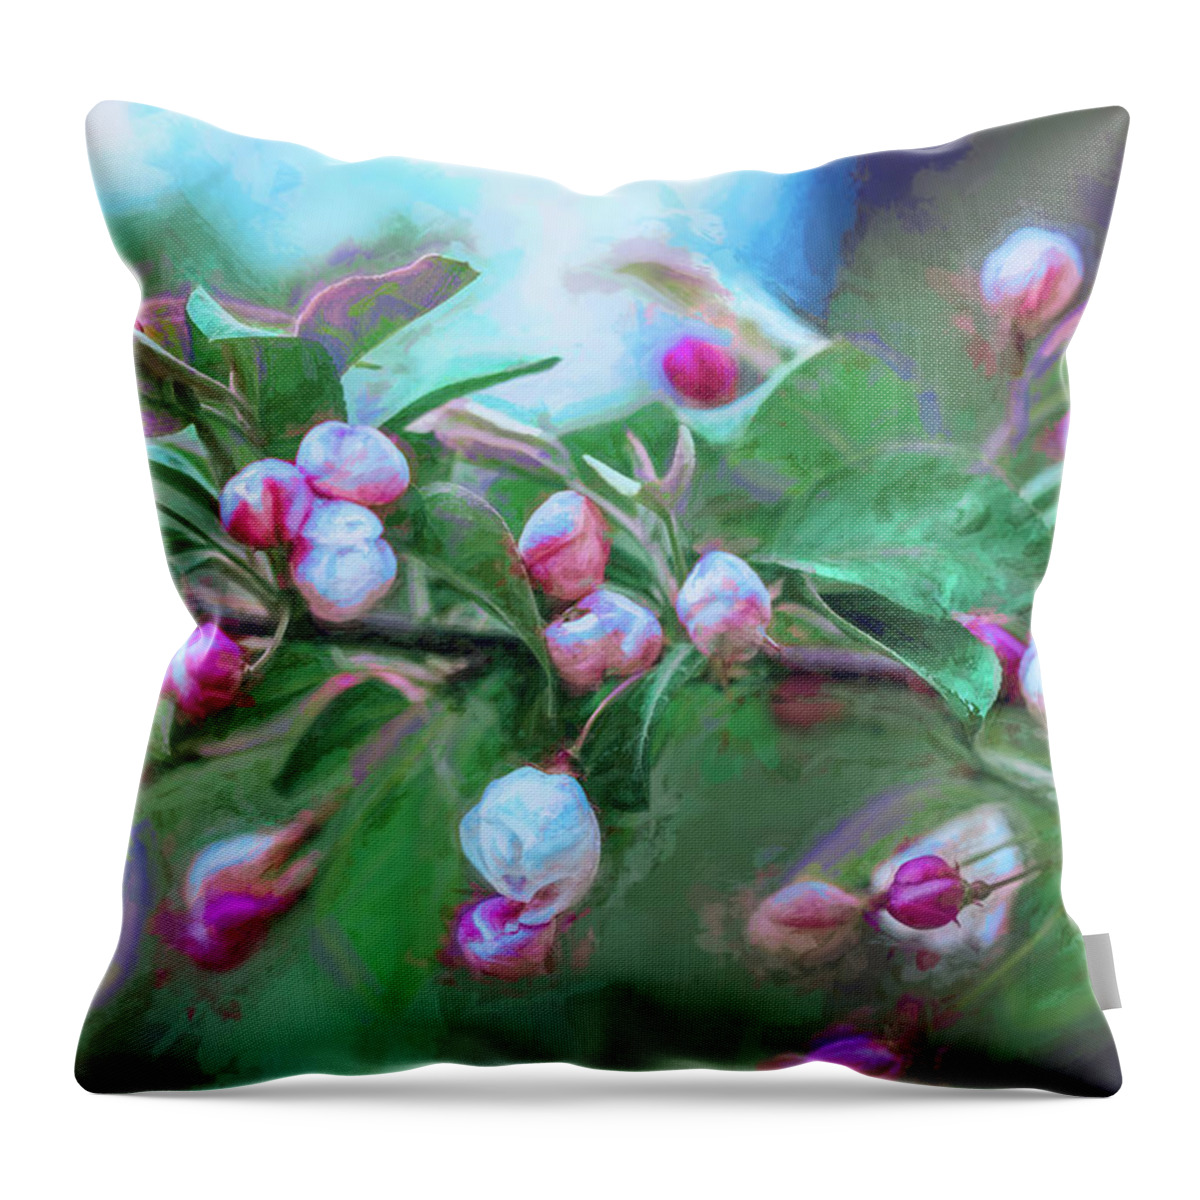 Spring Throw Pillow featuring the digital art Spring Tree Buds by Barry Wills